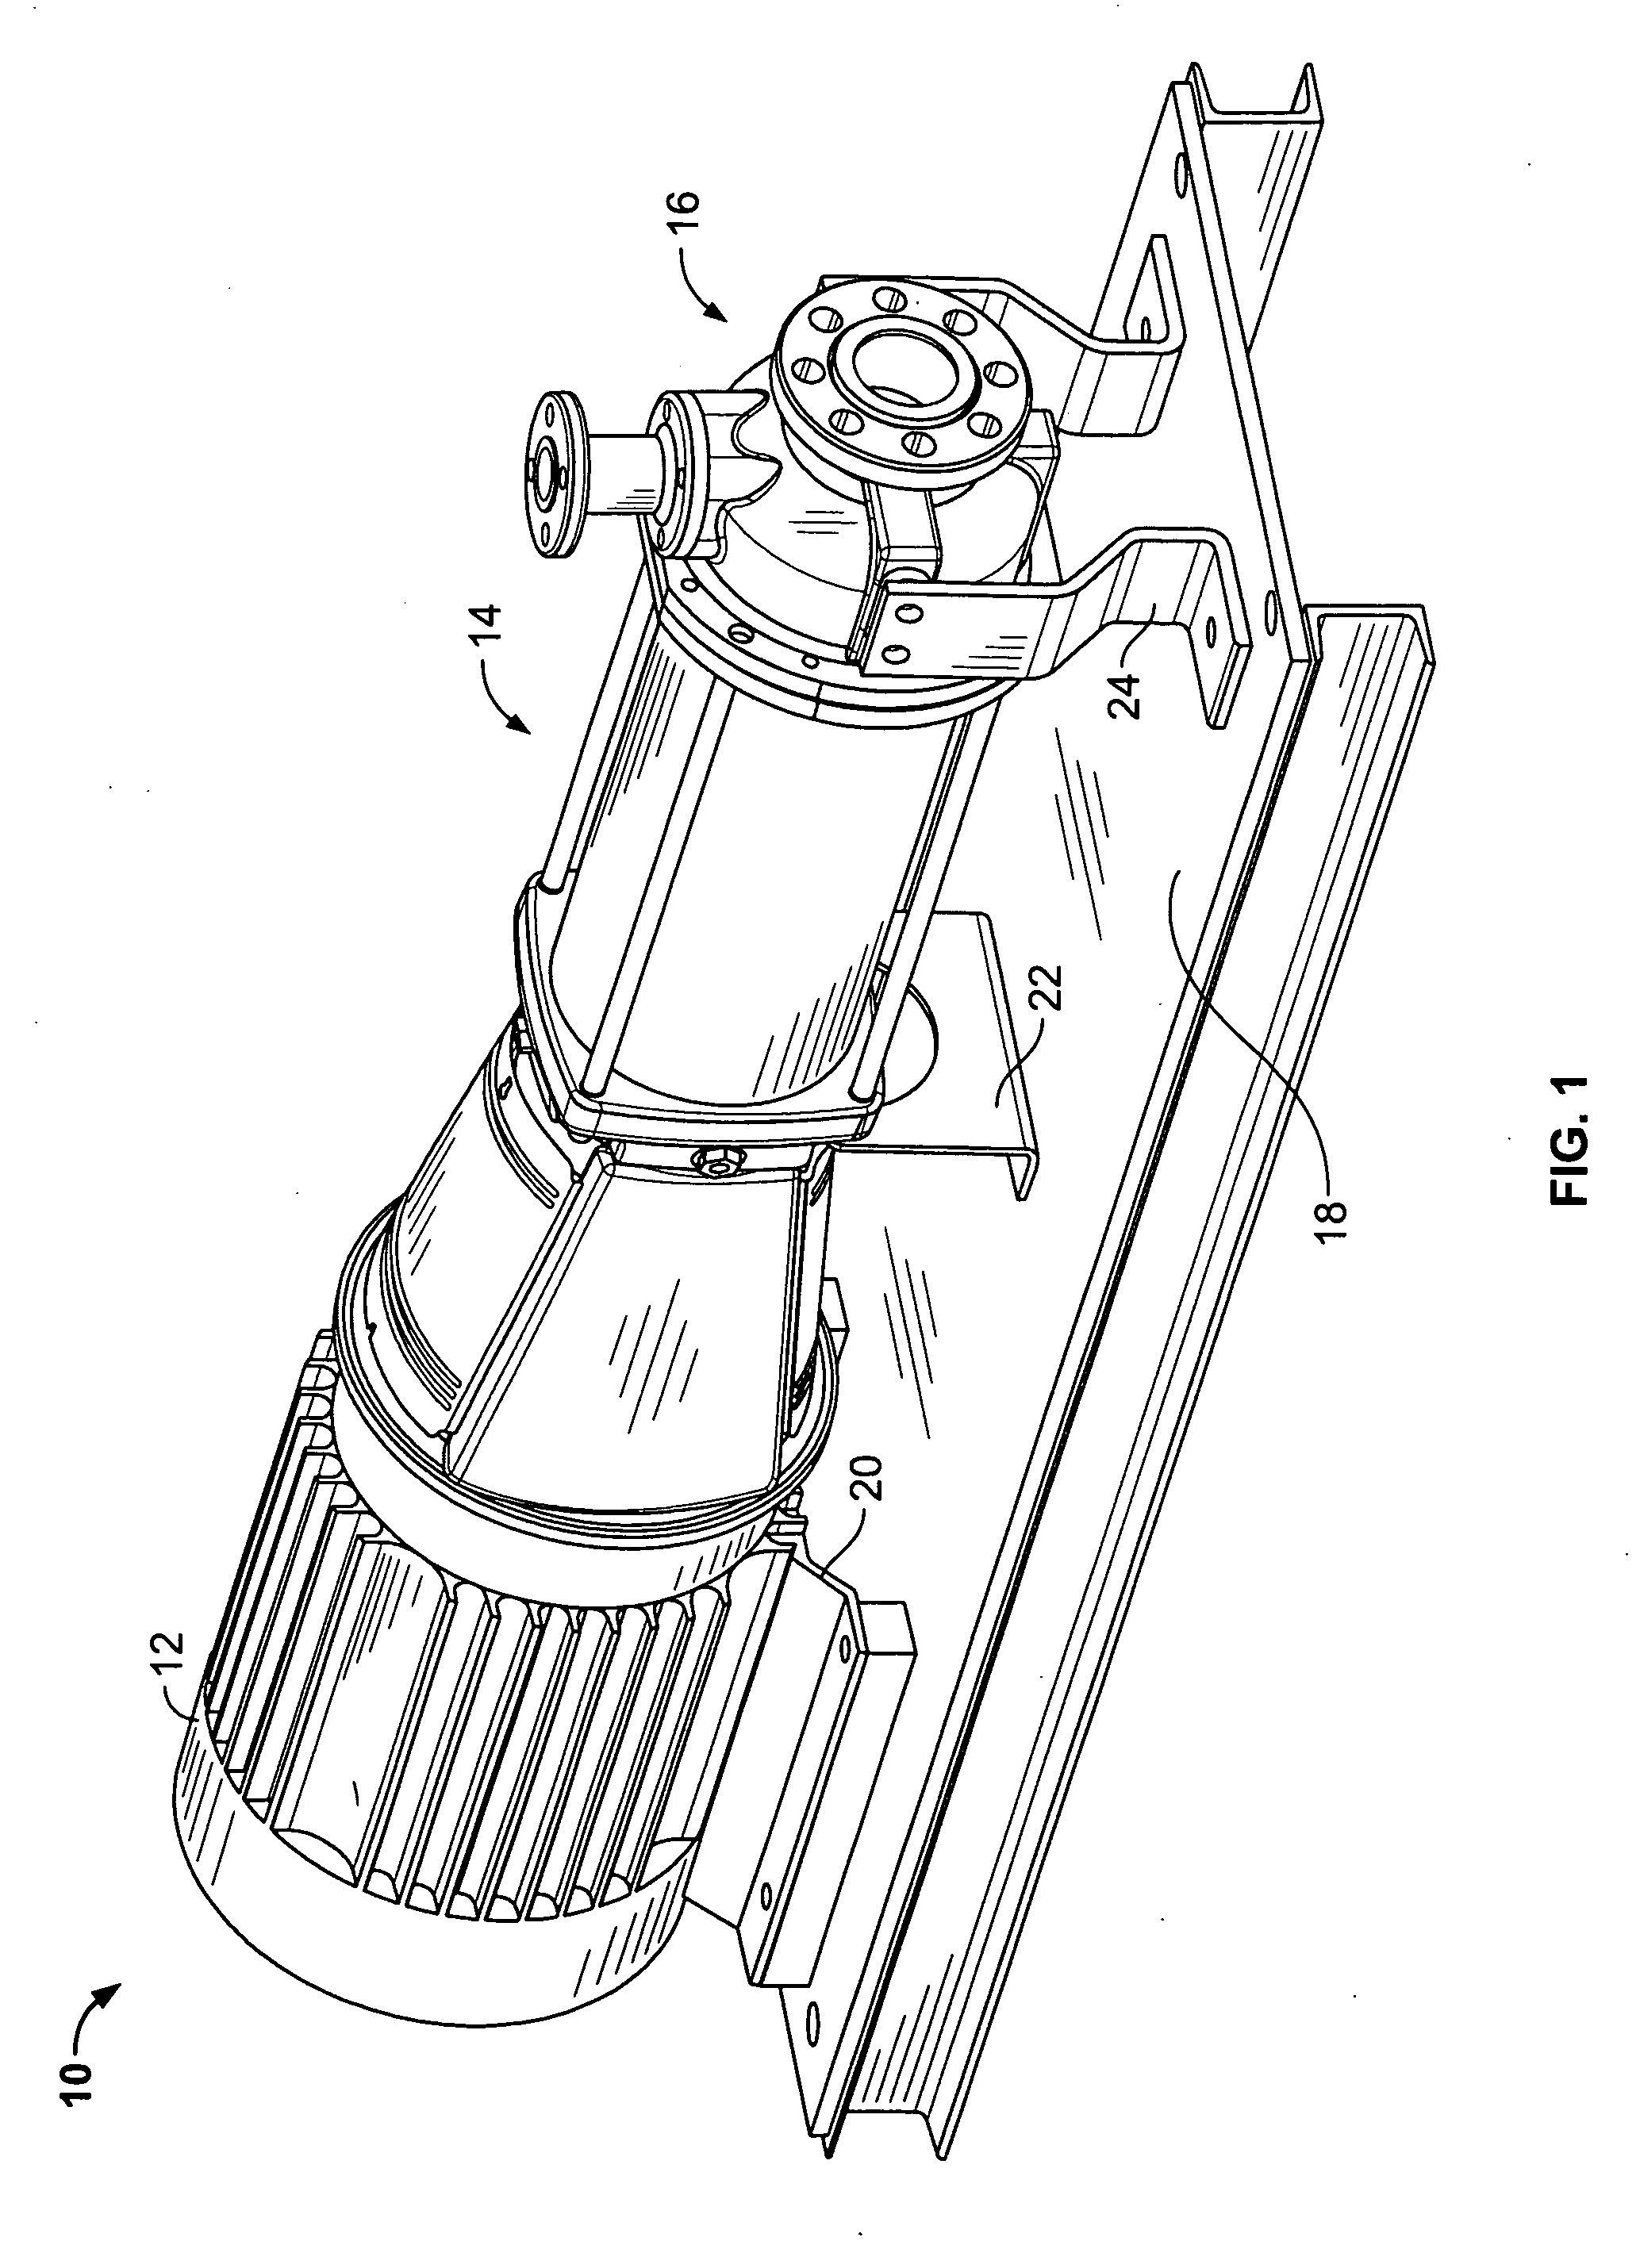 Multistage pump assembly having removable cartridge